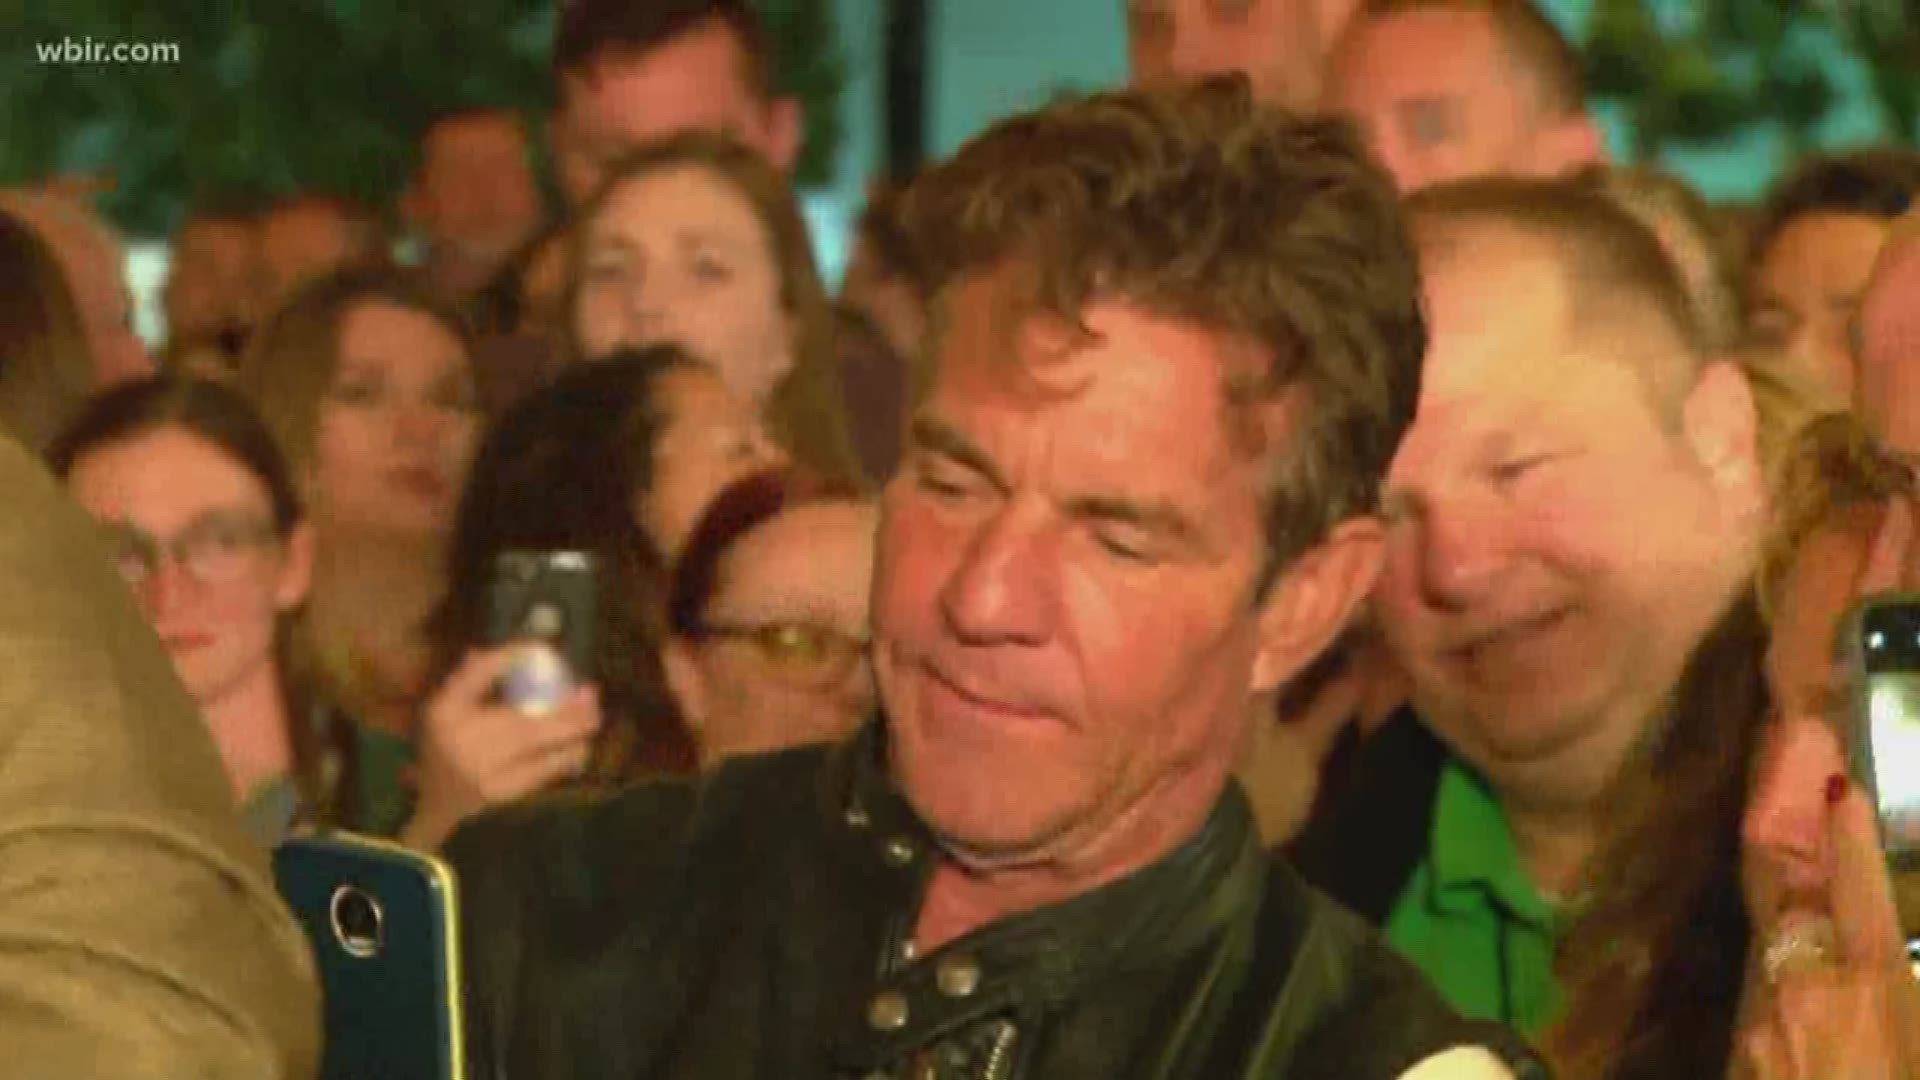 East Tennessee went Hollywood! Actor Dennis Quaid appeared on the red carpet in West Knoxville Tuesday.